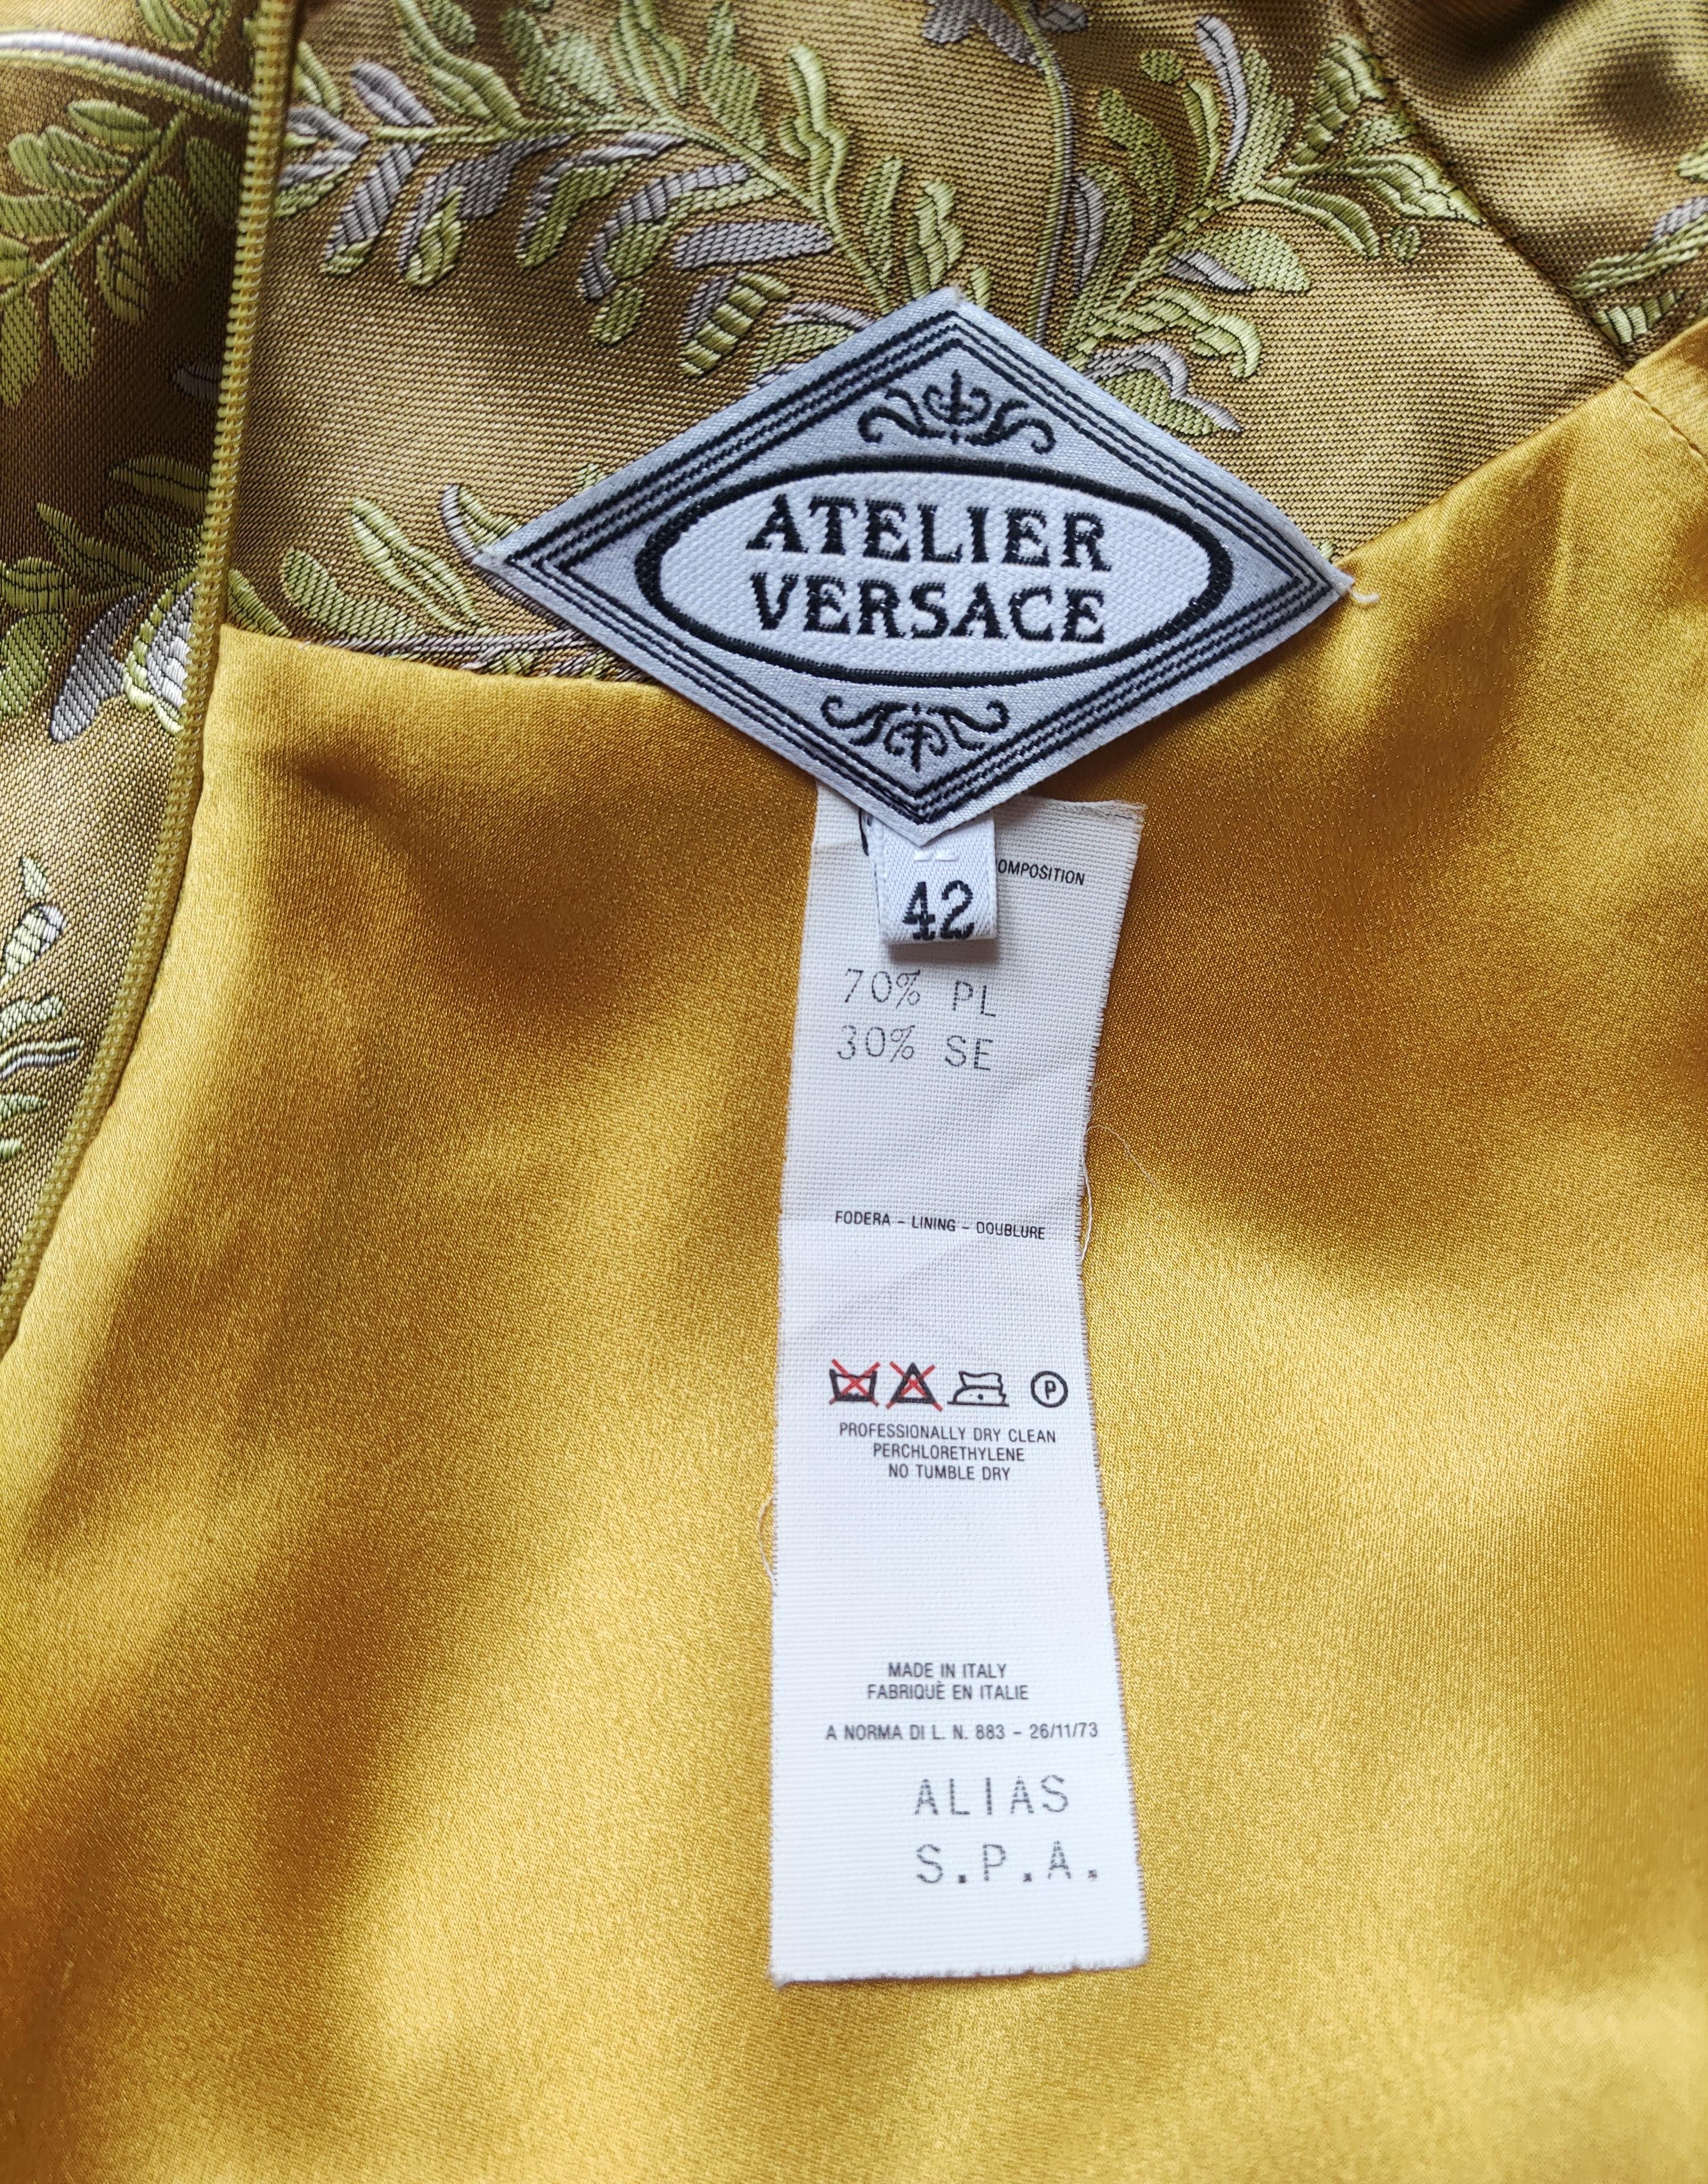 Atelier Gianni Versace Silk Mustard Yellow Floral Leaf Evening Baroque Dress For Sale 9